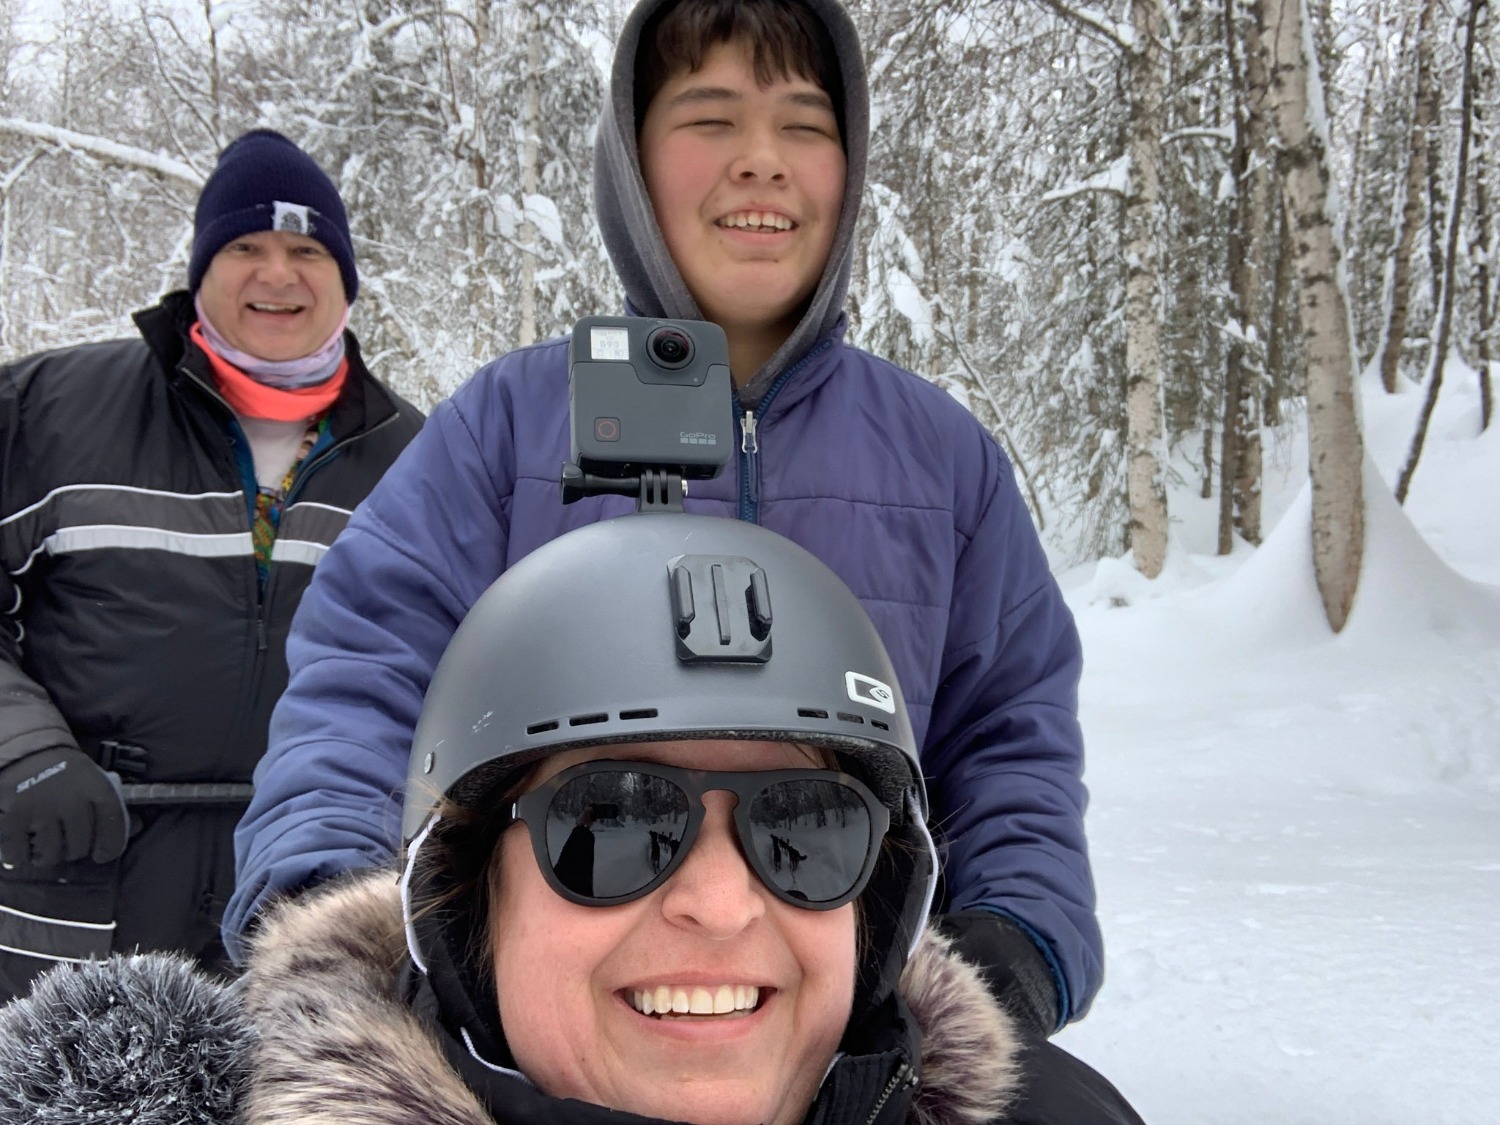 Emily Wisland is wearing a GoPro while capturing images on a dogsled with musher Samuel from Snowhook Kennels behind her and Mike Wisland taking up the rear.